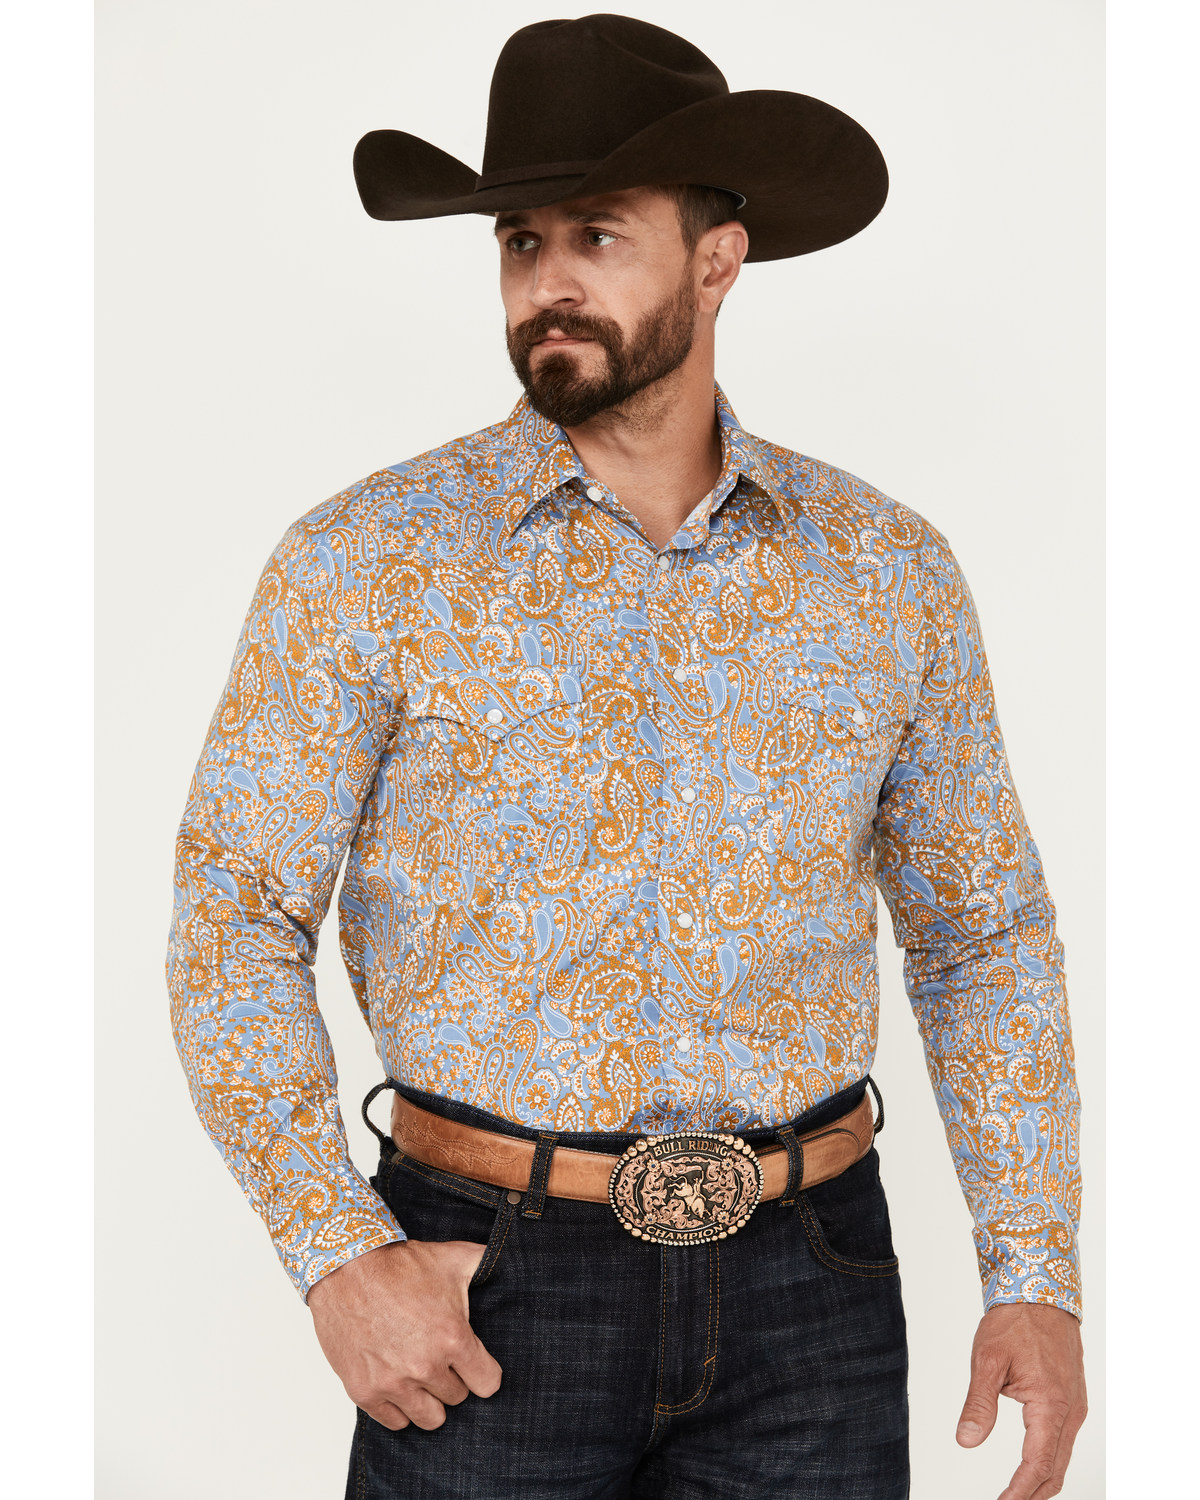 Rough Stock by Panhandle Men's Floral Paisley Print Long Sleeve Pearl Snap Stretch Western Shirt